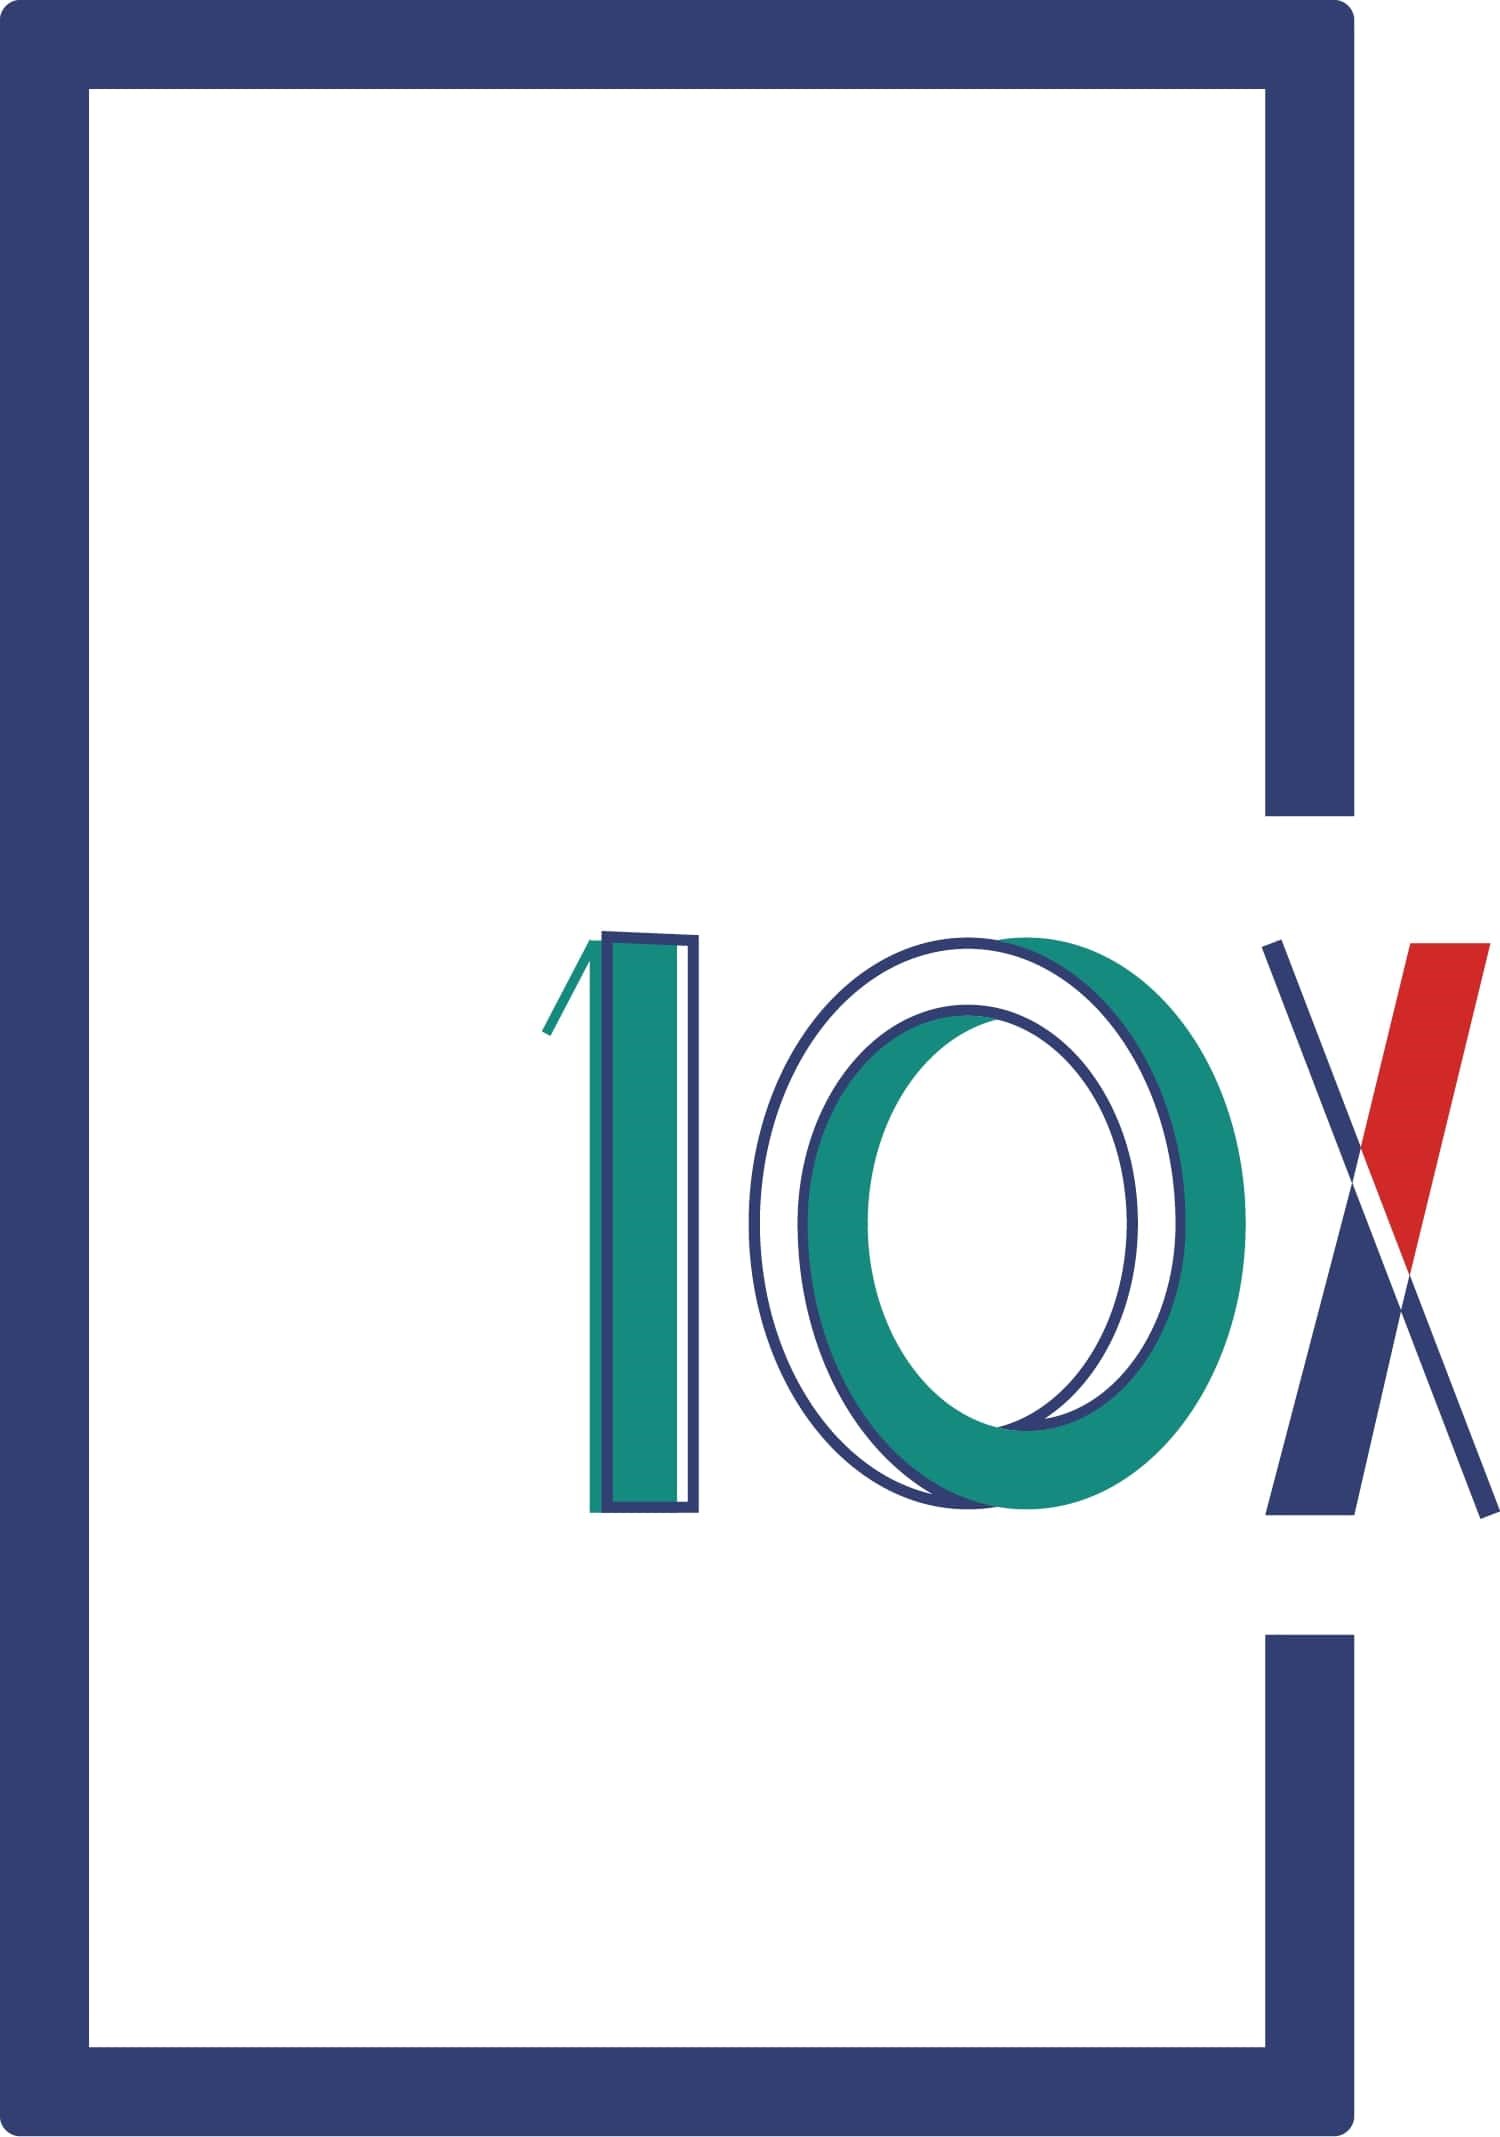 10X Project